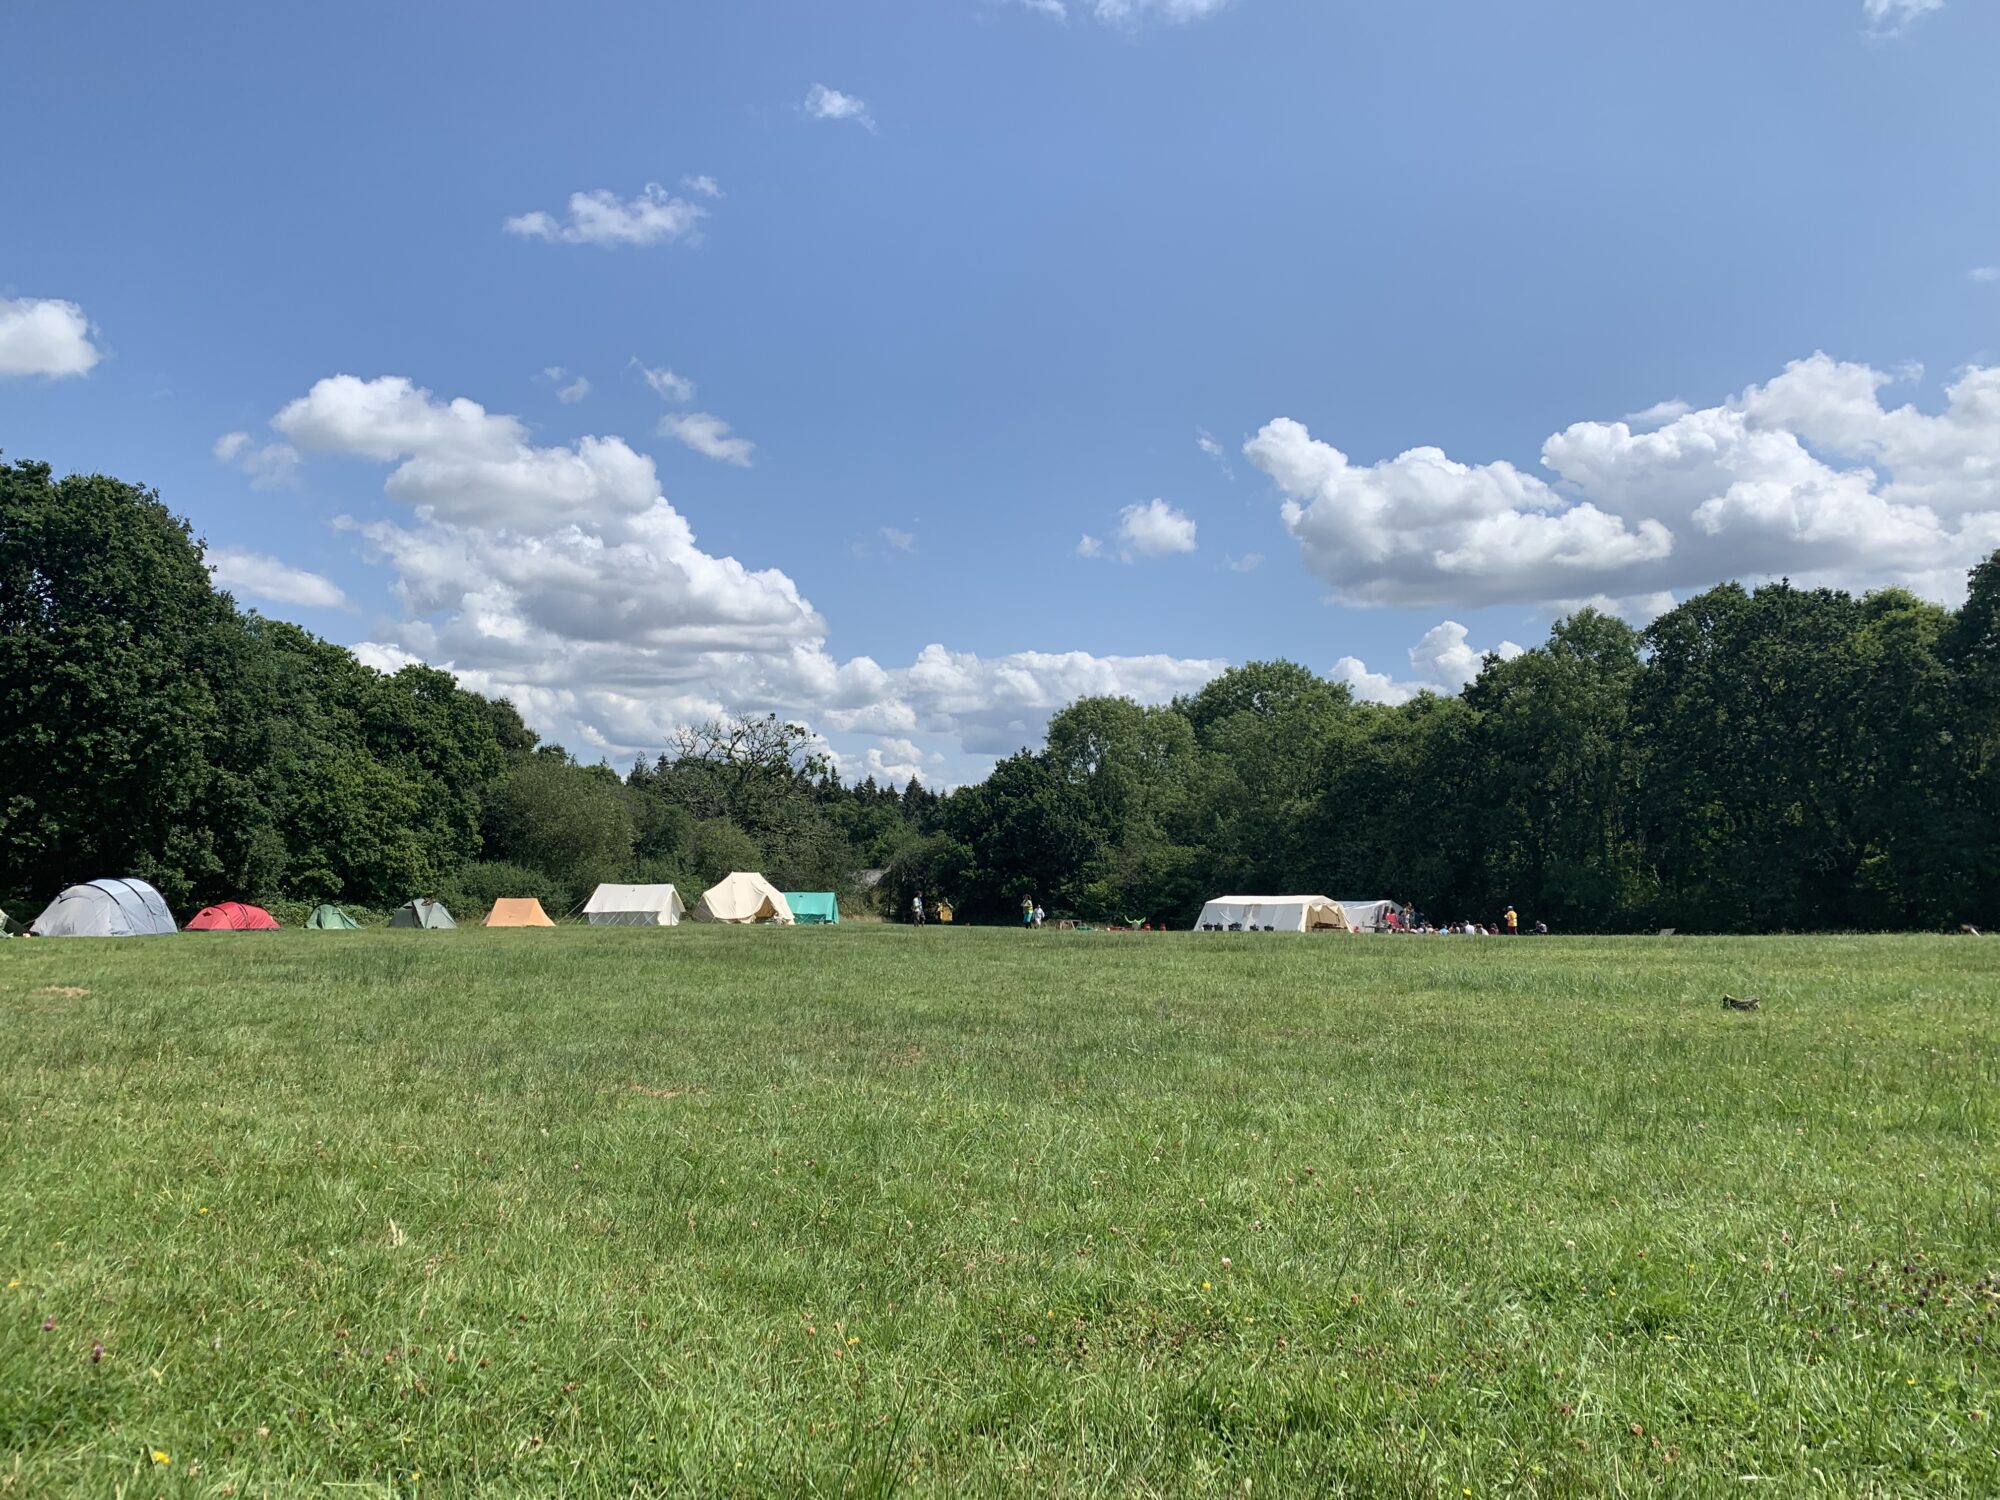 Field with tents